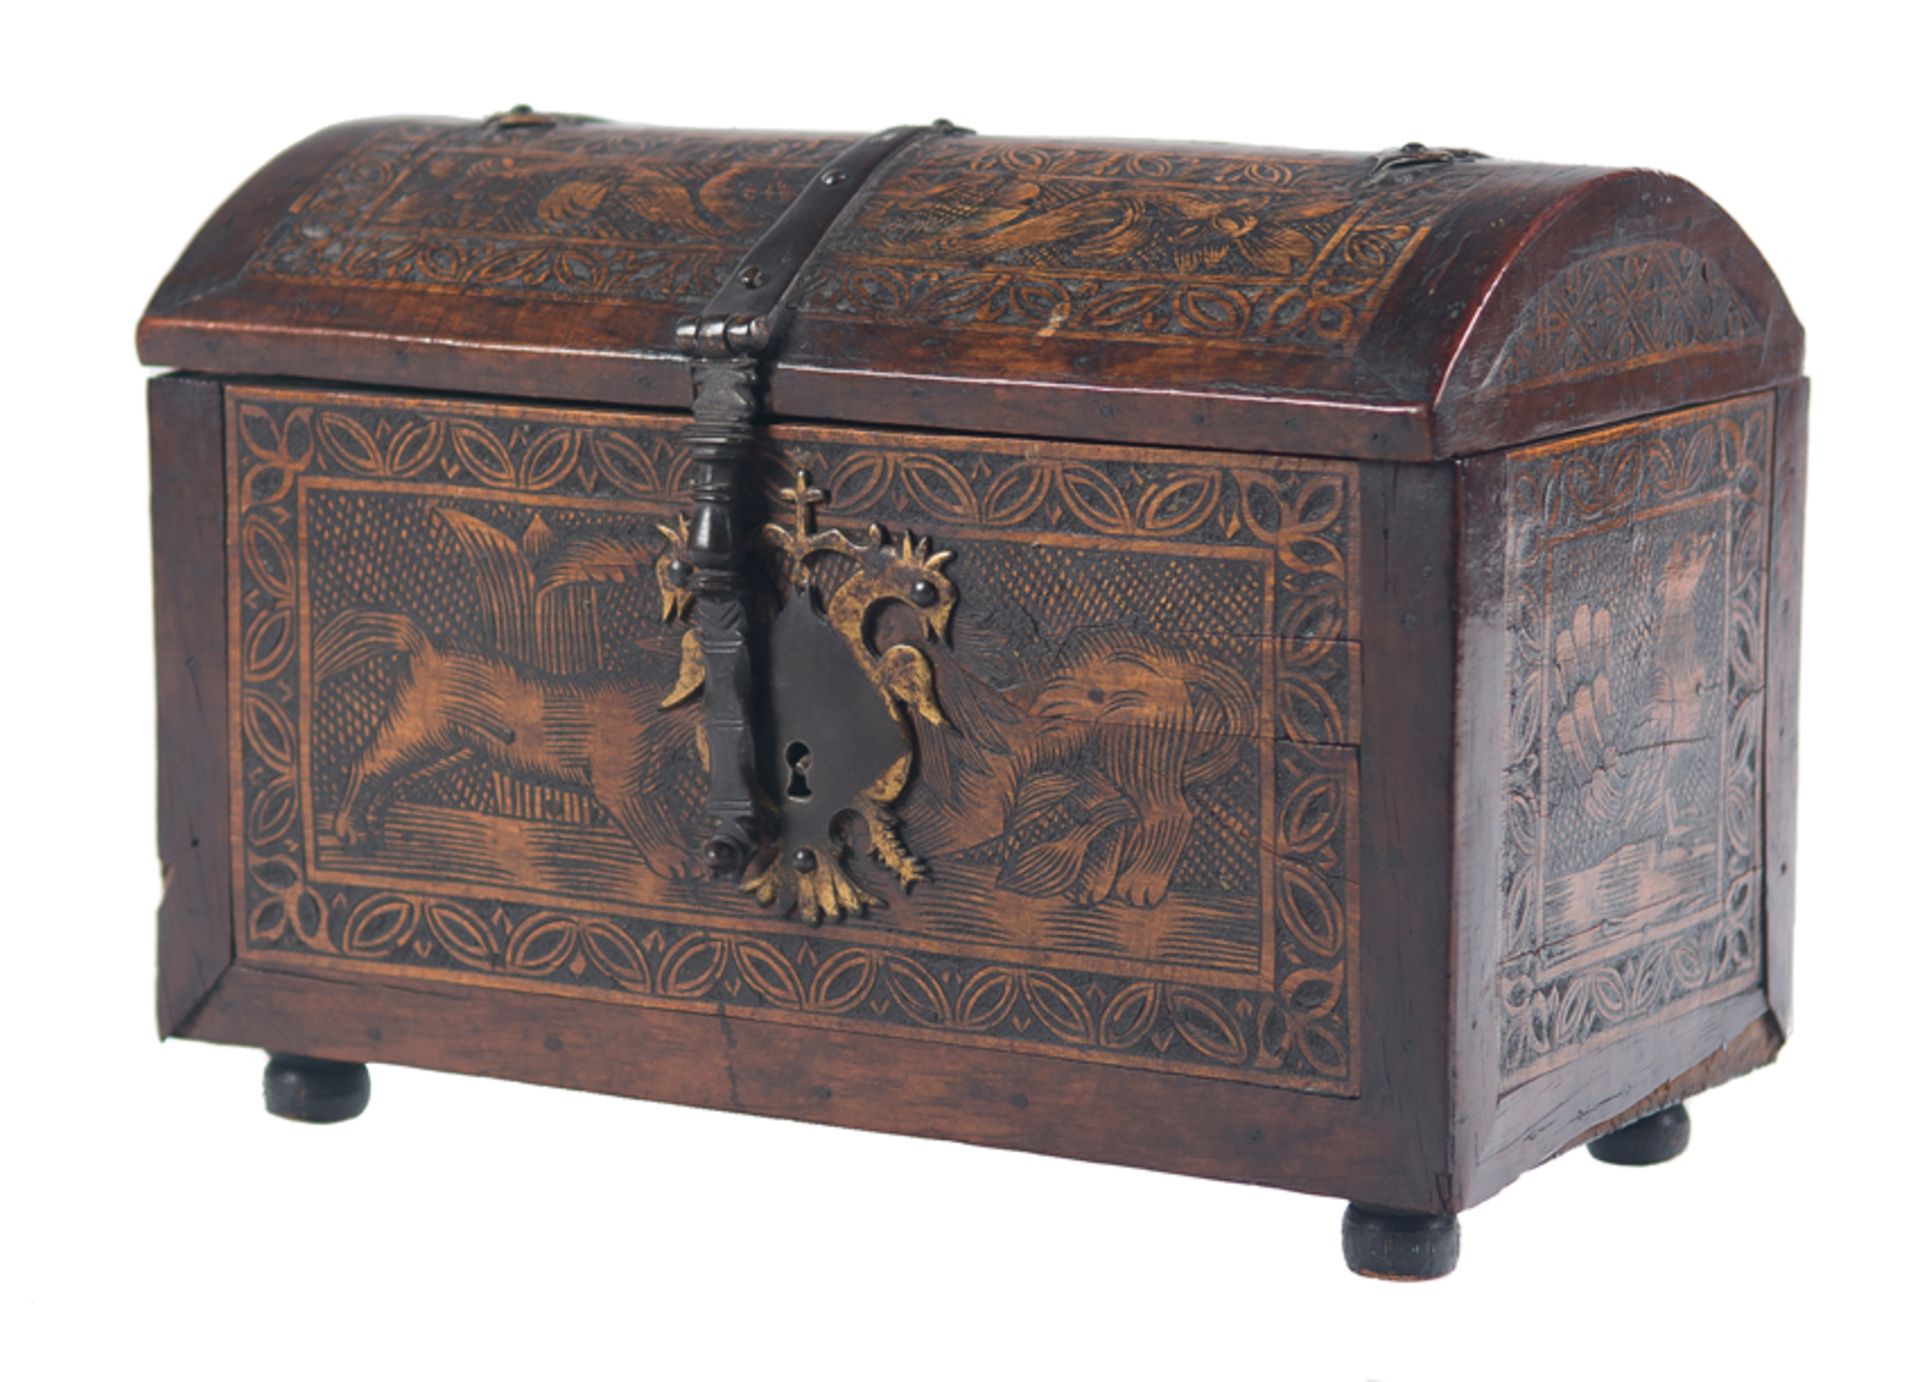 Engraved wooden chest with iron fittings and curved lid. Colonial work. Villa Alta de San Ildefonso, - Image 2 of 11